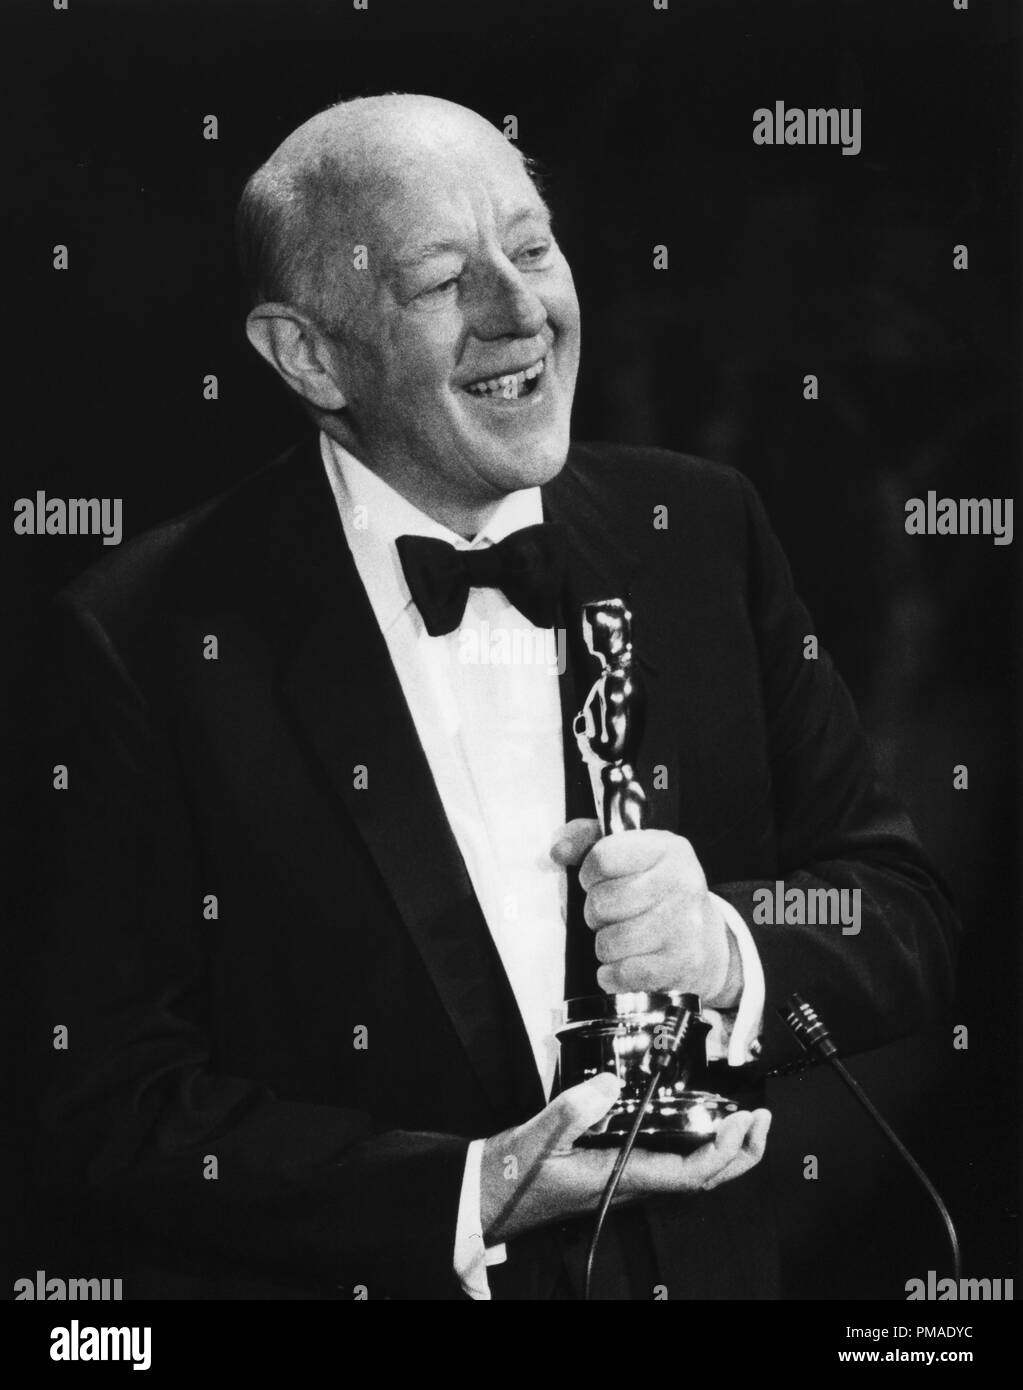 Sir Alec Guinness at the 52th Annual Academy Awards, 1980 File Reference # 32509_443THA Stock Photo